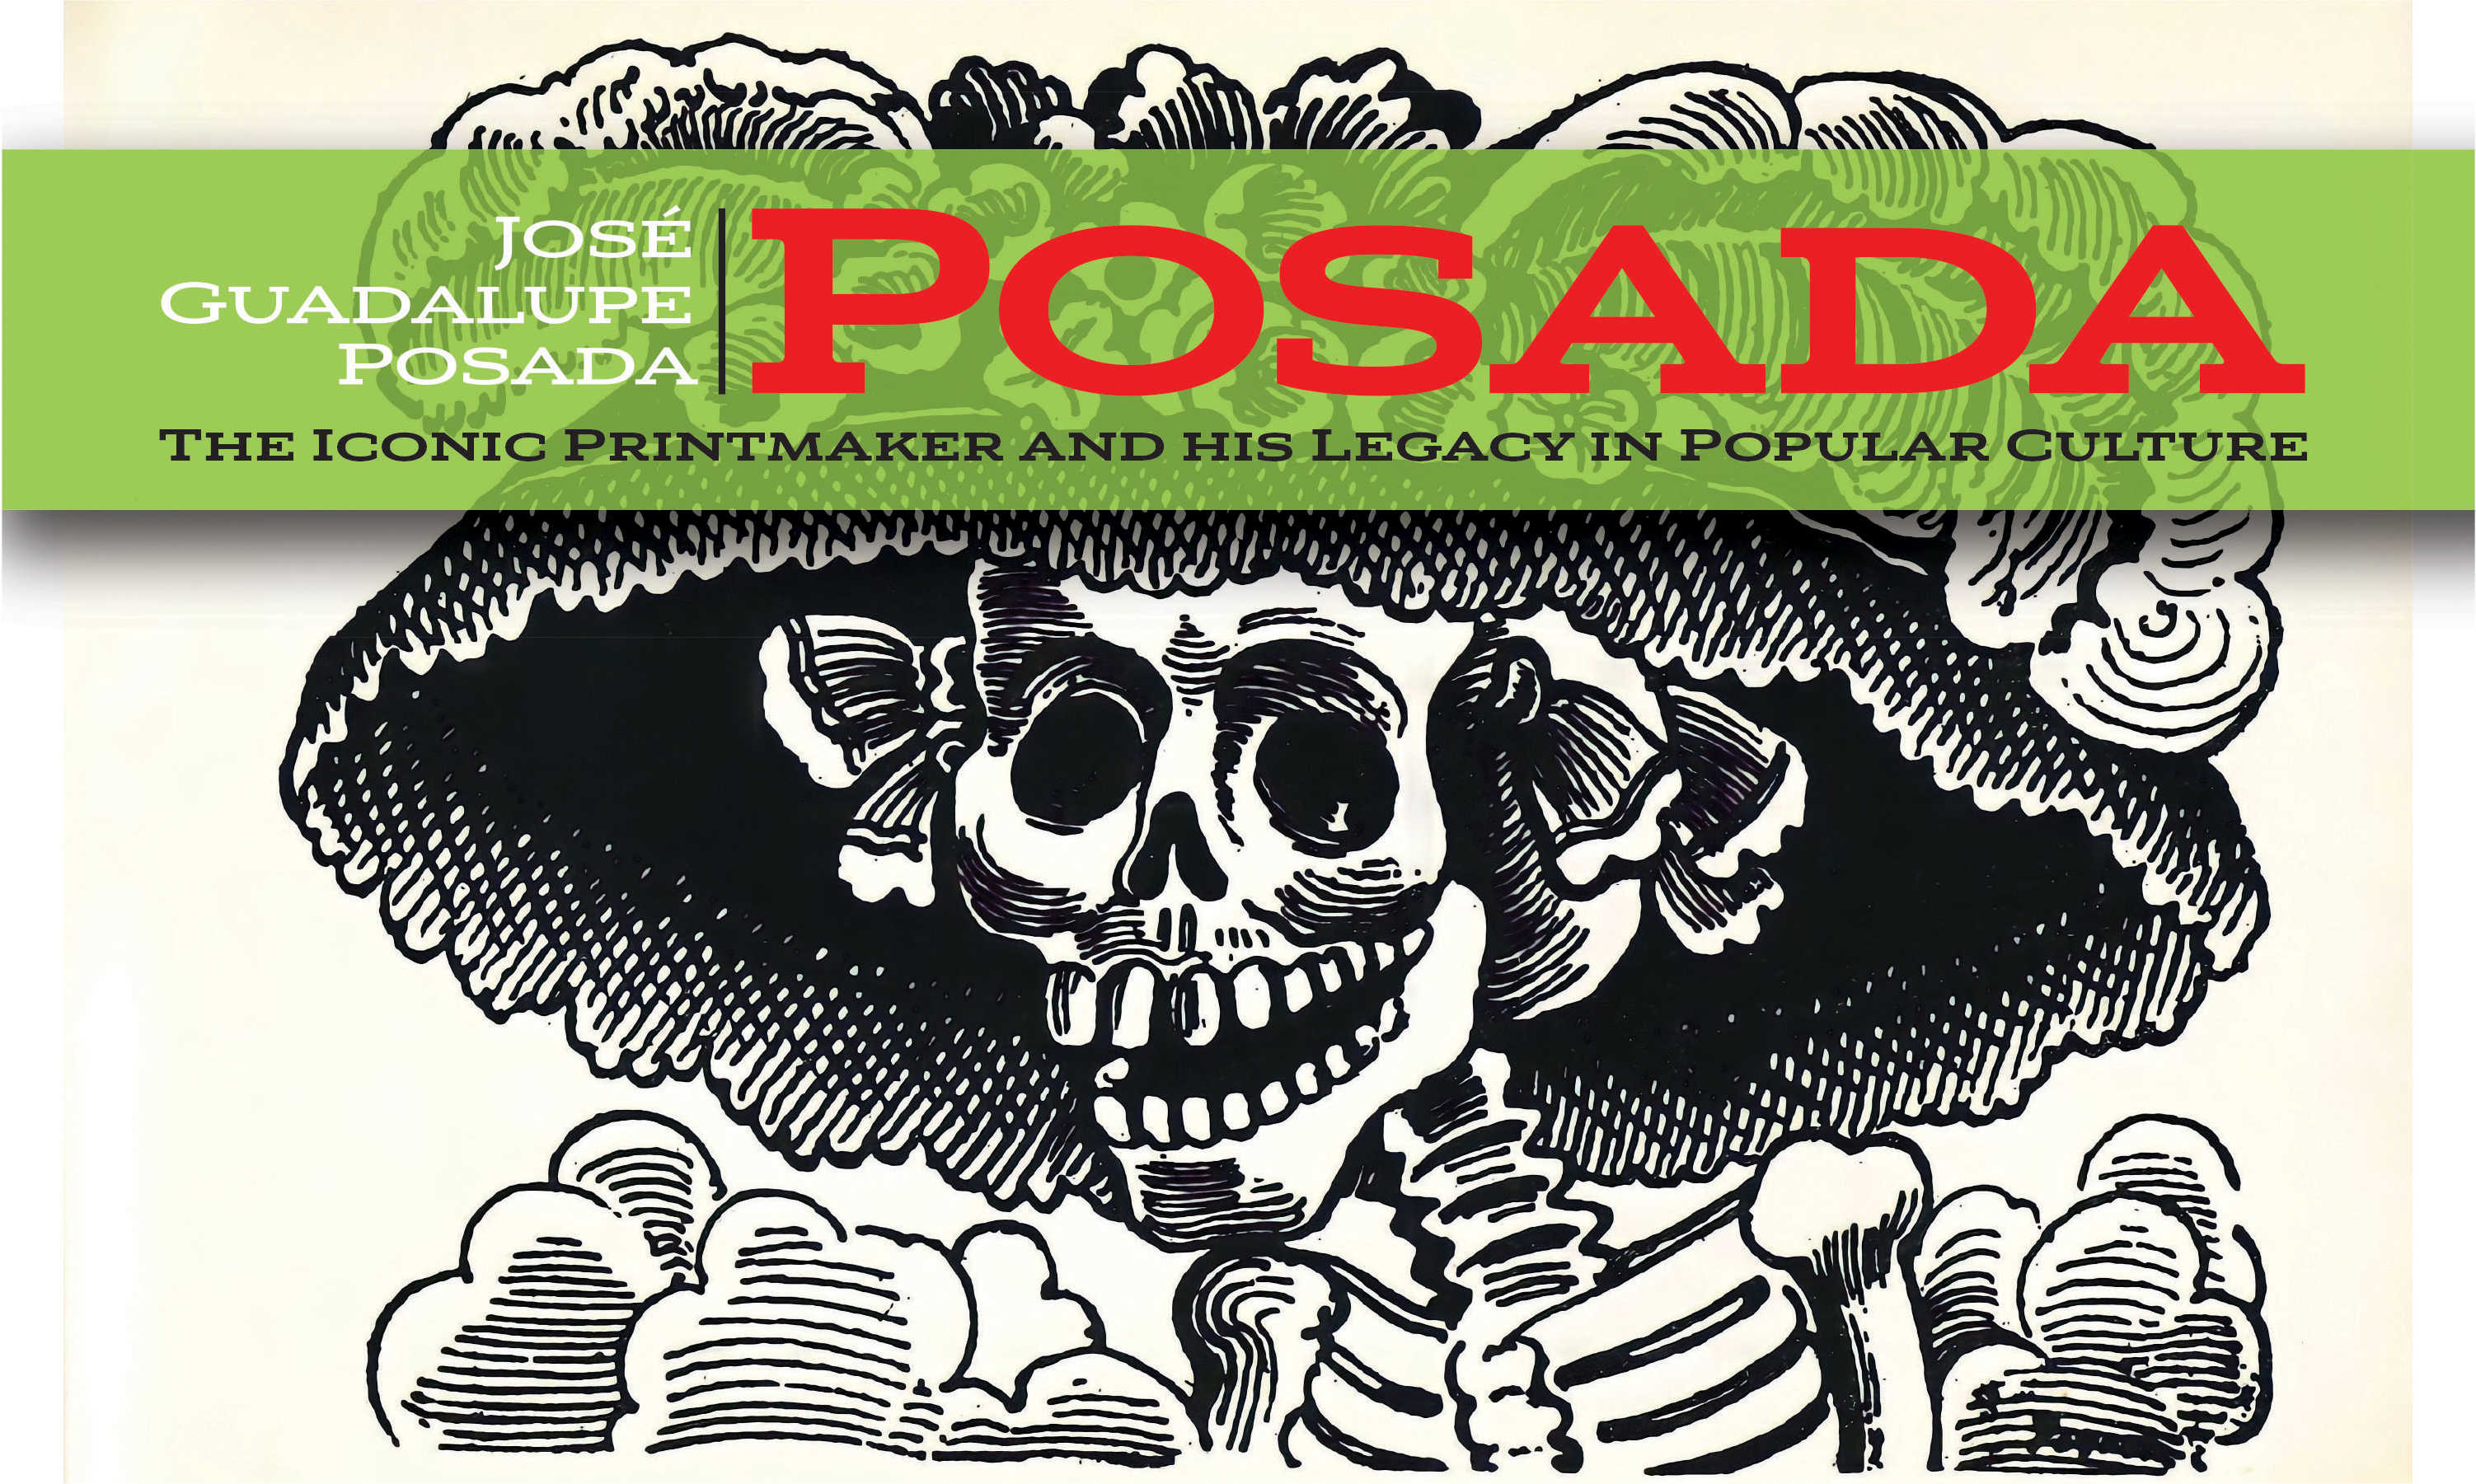 José Guadalupe Posada: The Iconic Printmaker and his Legacy in Popular Culture